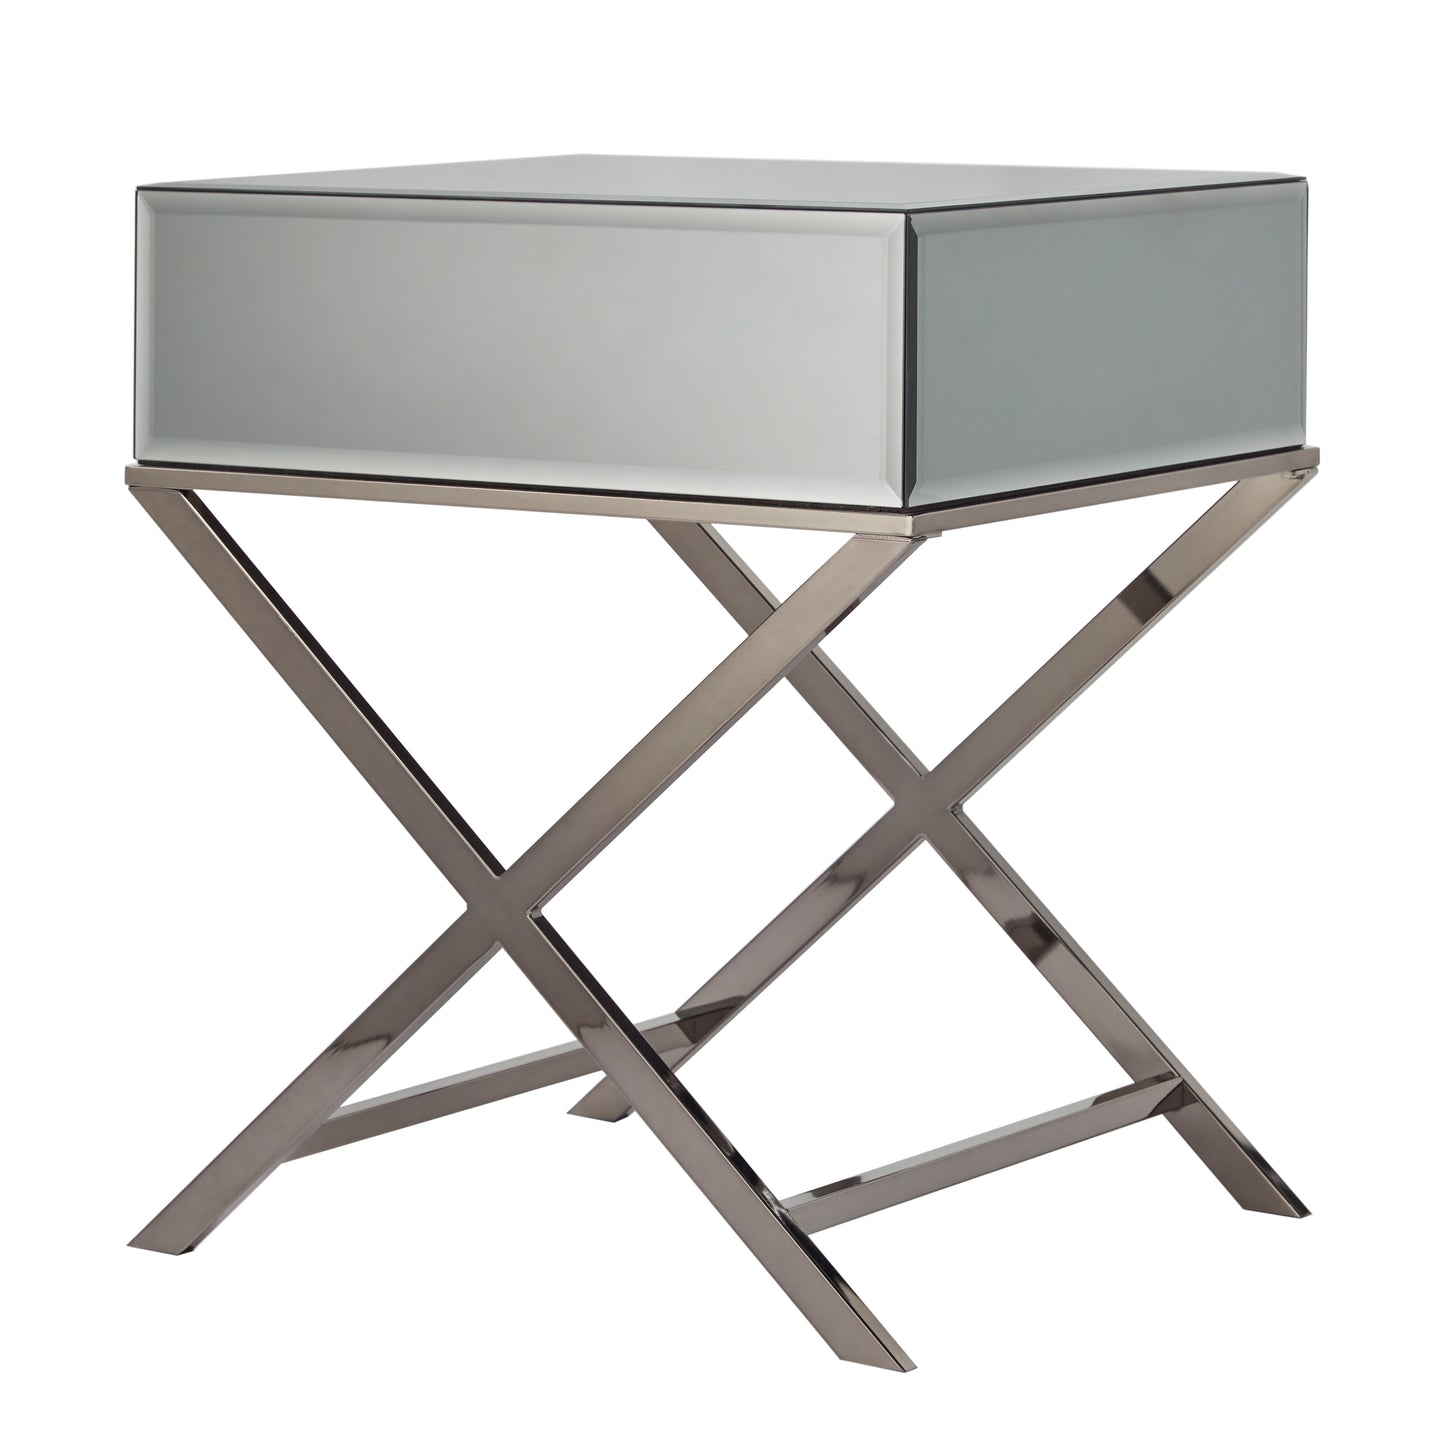 X-Base Mirrored Accent Campaign Table - Black Nickel